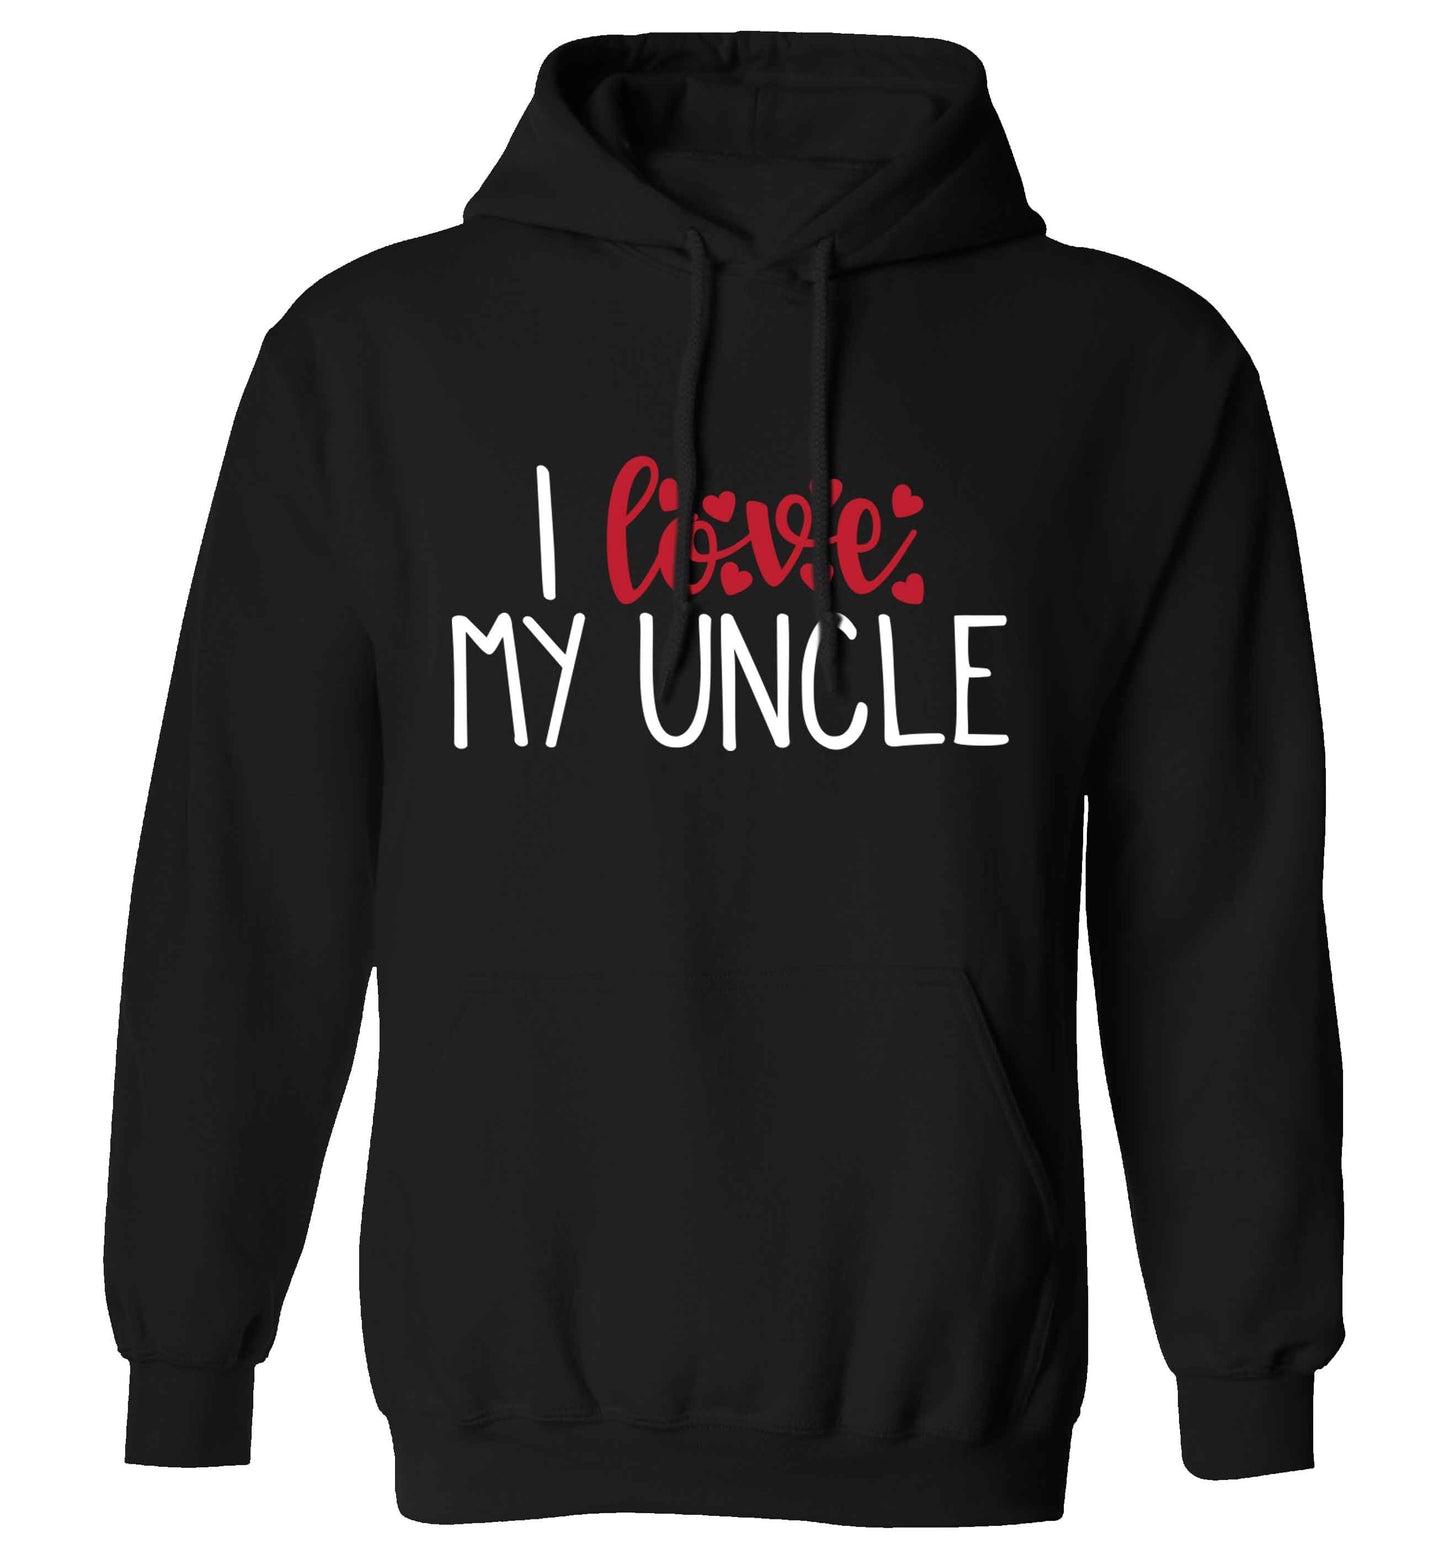 I love my uncle adults unisex black hoodie 2XL